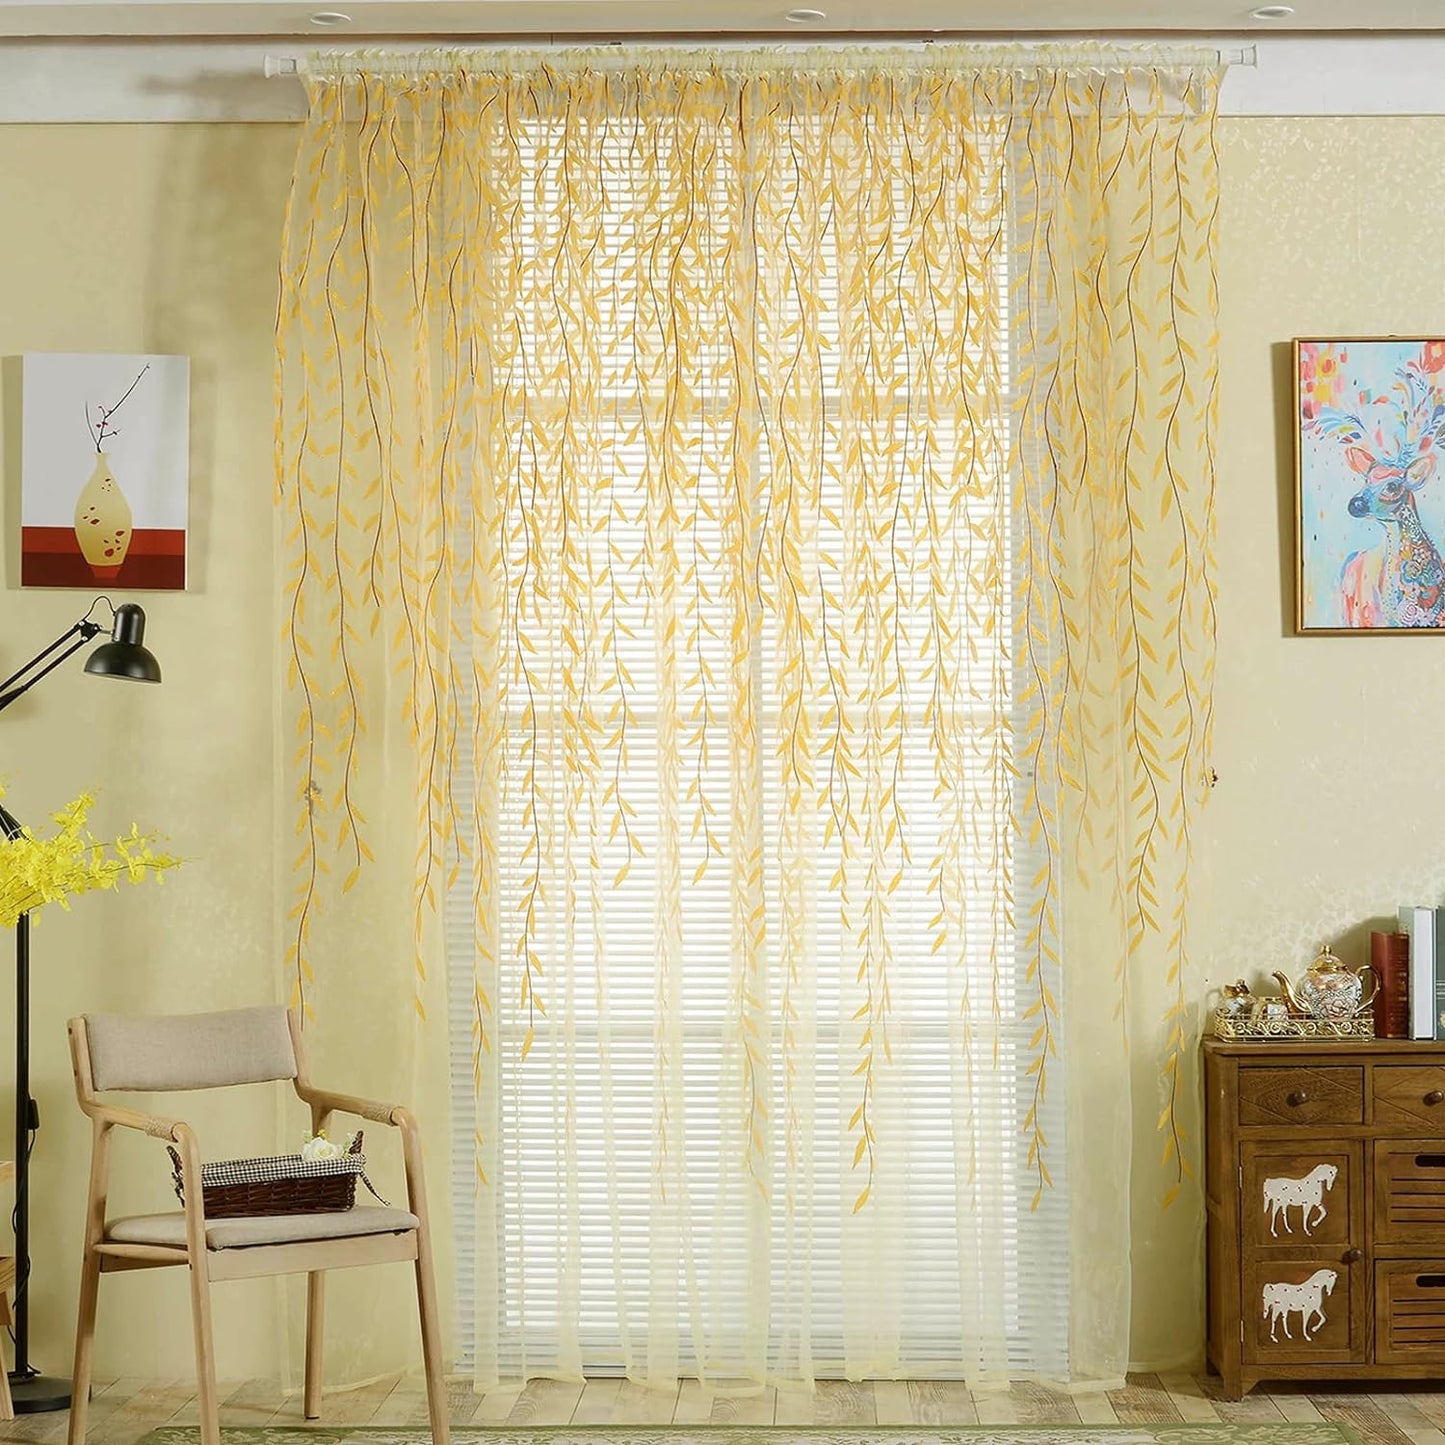 Ufurty Rely2016 Sunflower Window Curtain, 2PCS Sun Flower Floral Voile Sheer Curtain Panels Tulle Room Salix Leaf Sheer Gauze Curtain for Living Room, Bedroom, Balcony - Rod Pocket Top (100 X 200)  Rely2016 Yellow Leaf 100*200Cm 